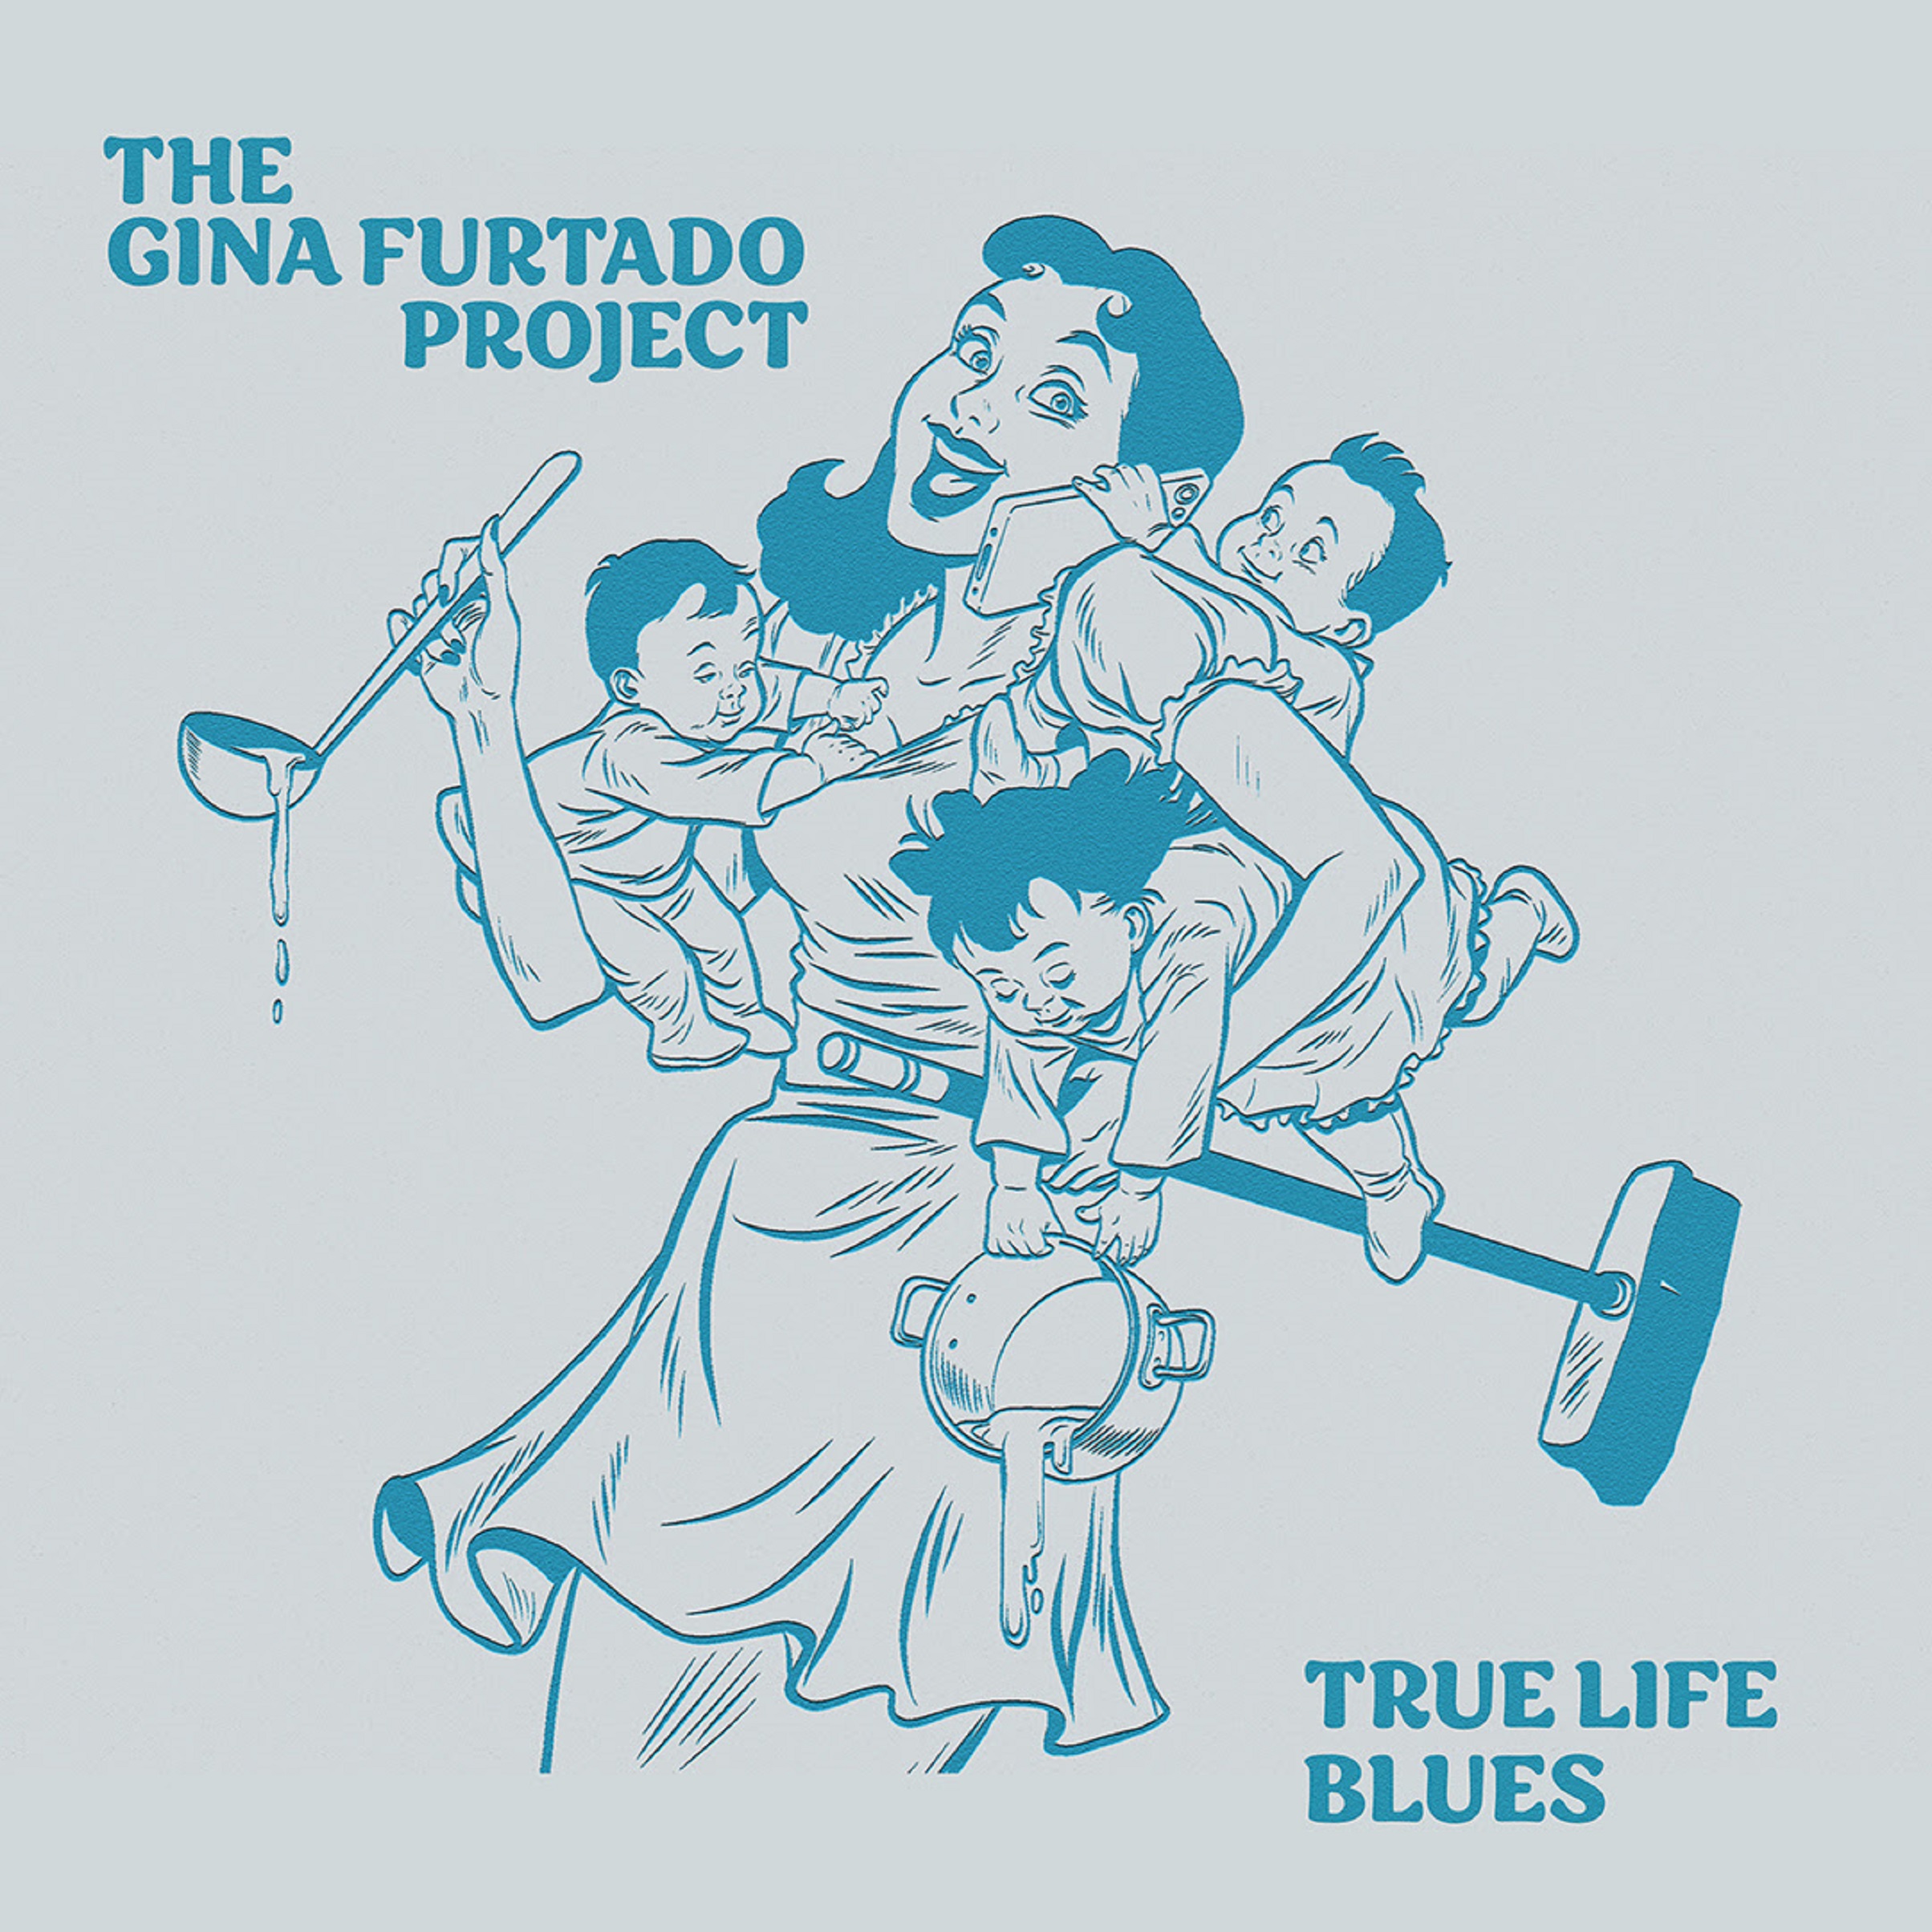 The Gina Furtado Project draws from Bluegrass music’s roots with “True Life Blues”